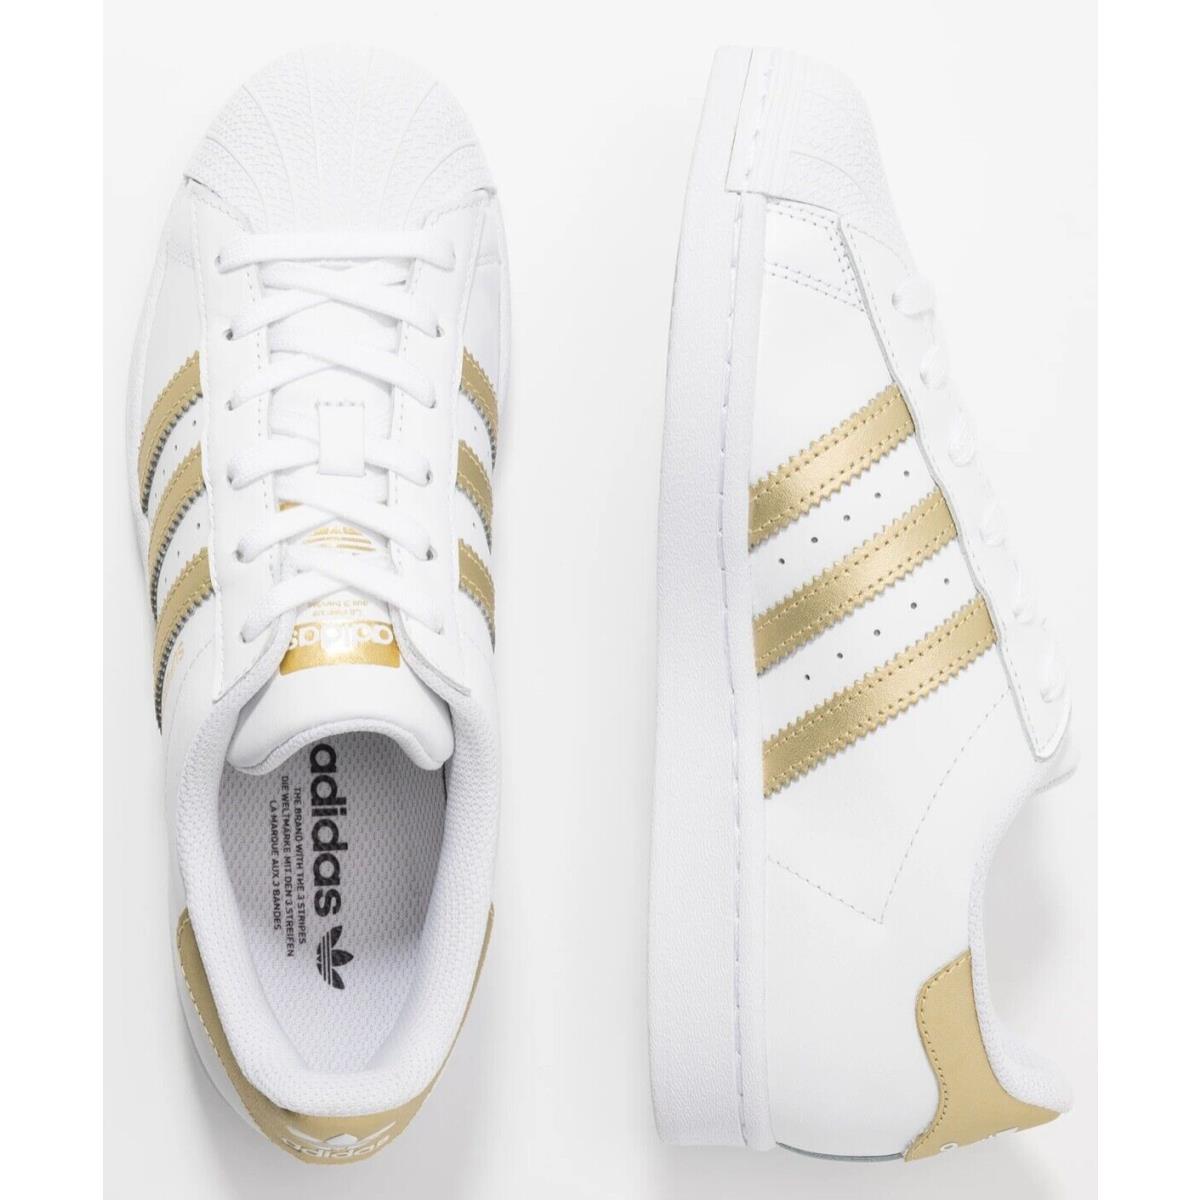 Adidas shoes Superstar - White Gold 3